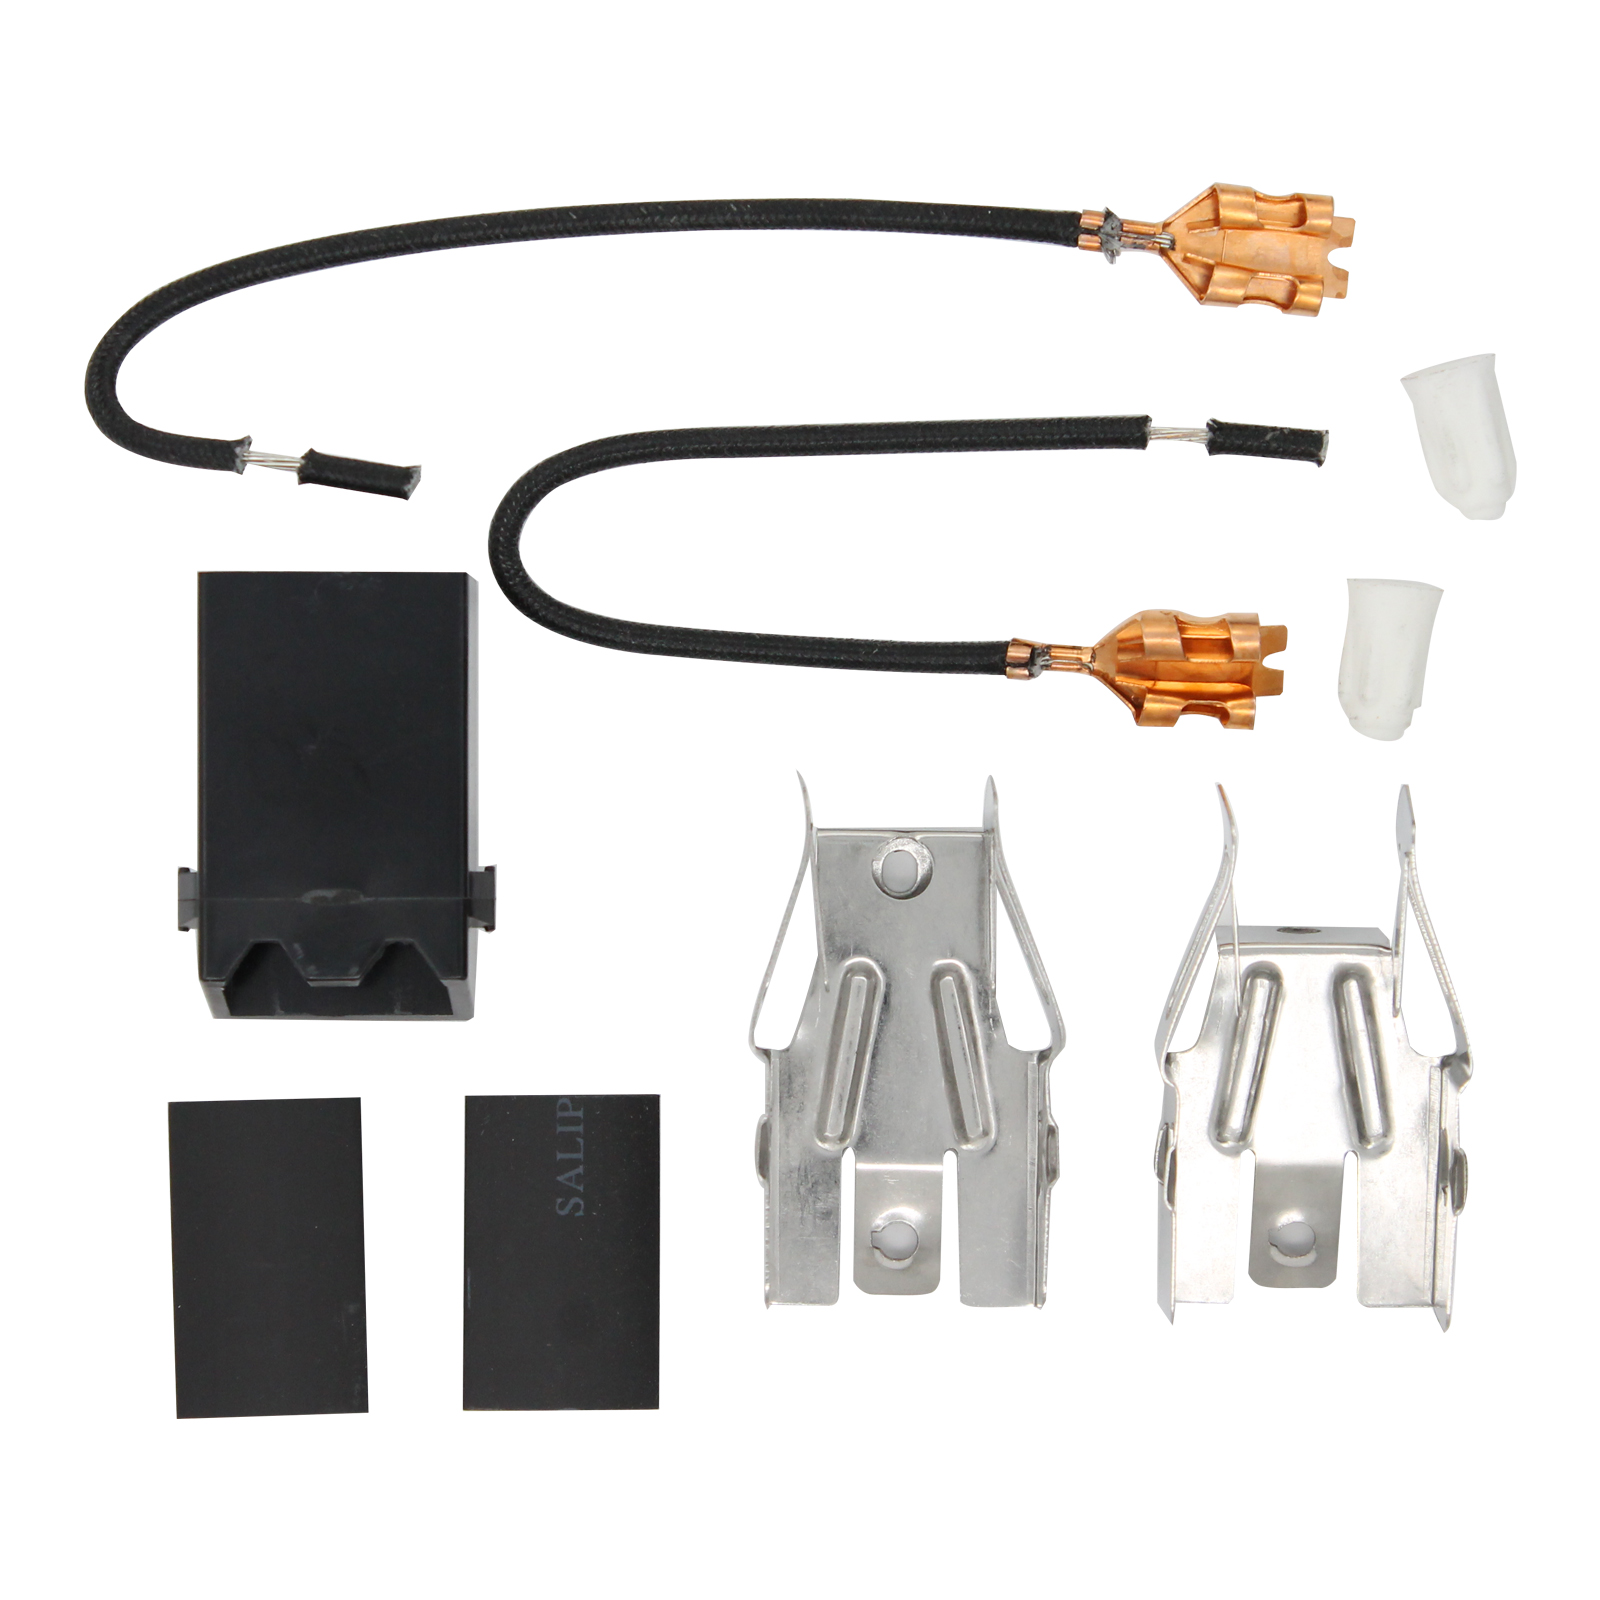 330031 Top Burner Receptacle Kit Replacement for Whirlpool RF360BXYN0 Range/Cooktop/Oven - Compatible with 330031 Range Burner Receptacle Kit - UpStart Components Brand - image 4 of 4